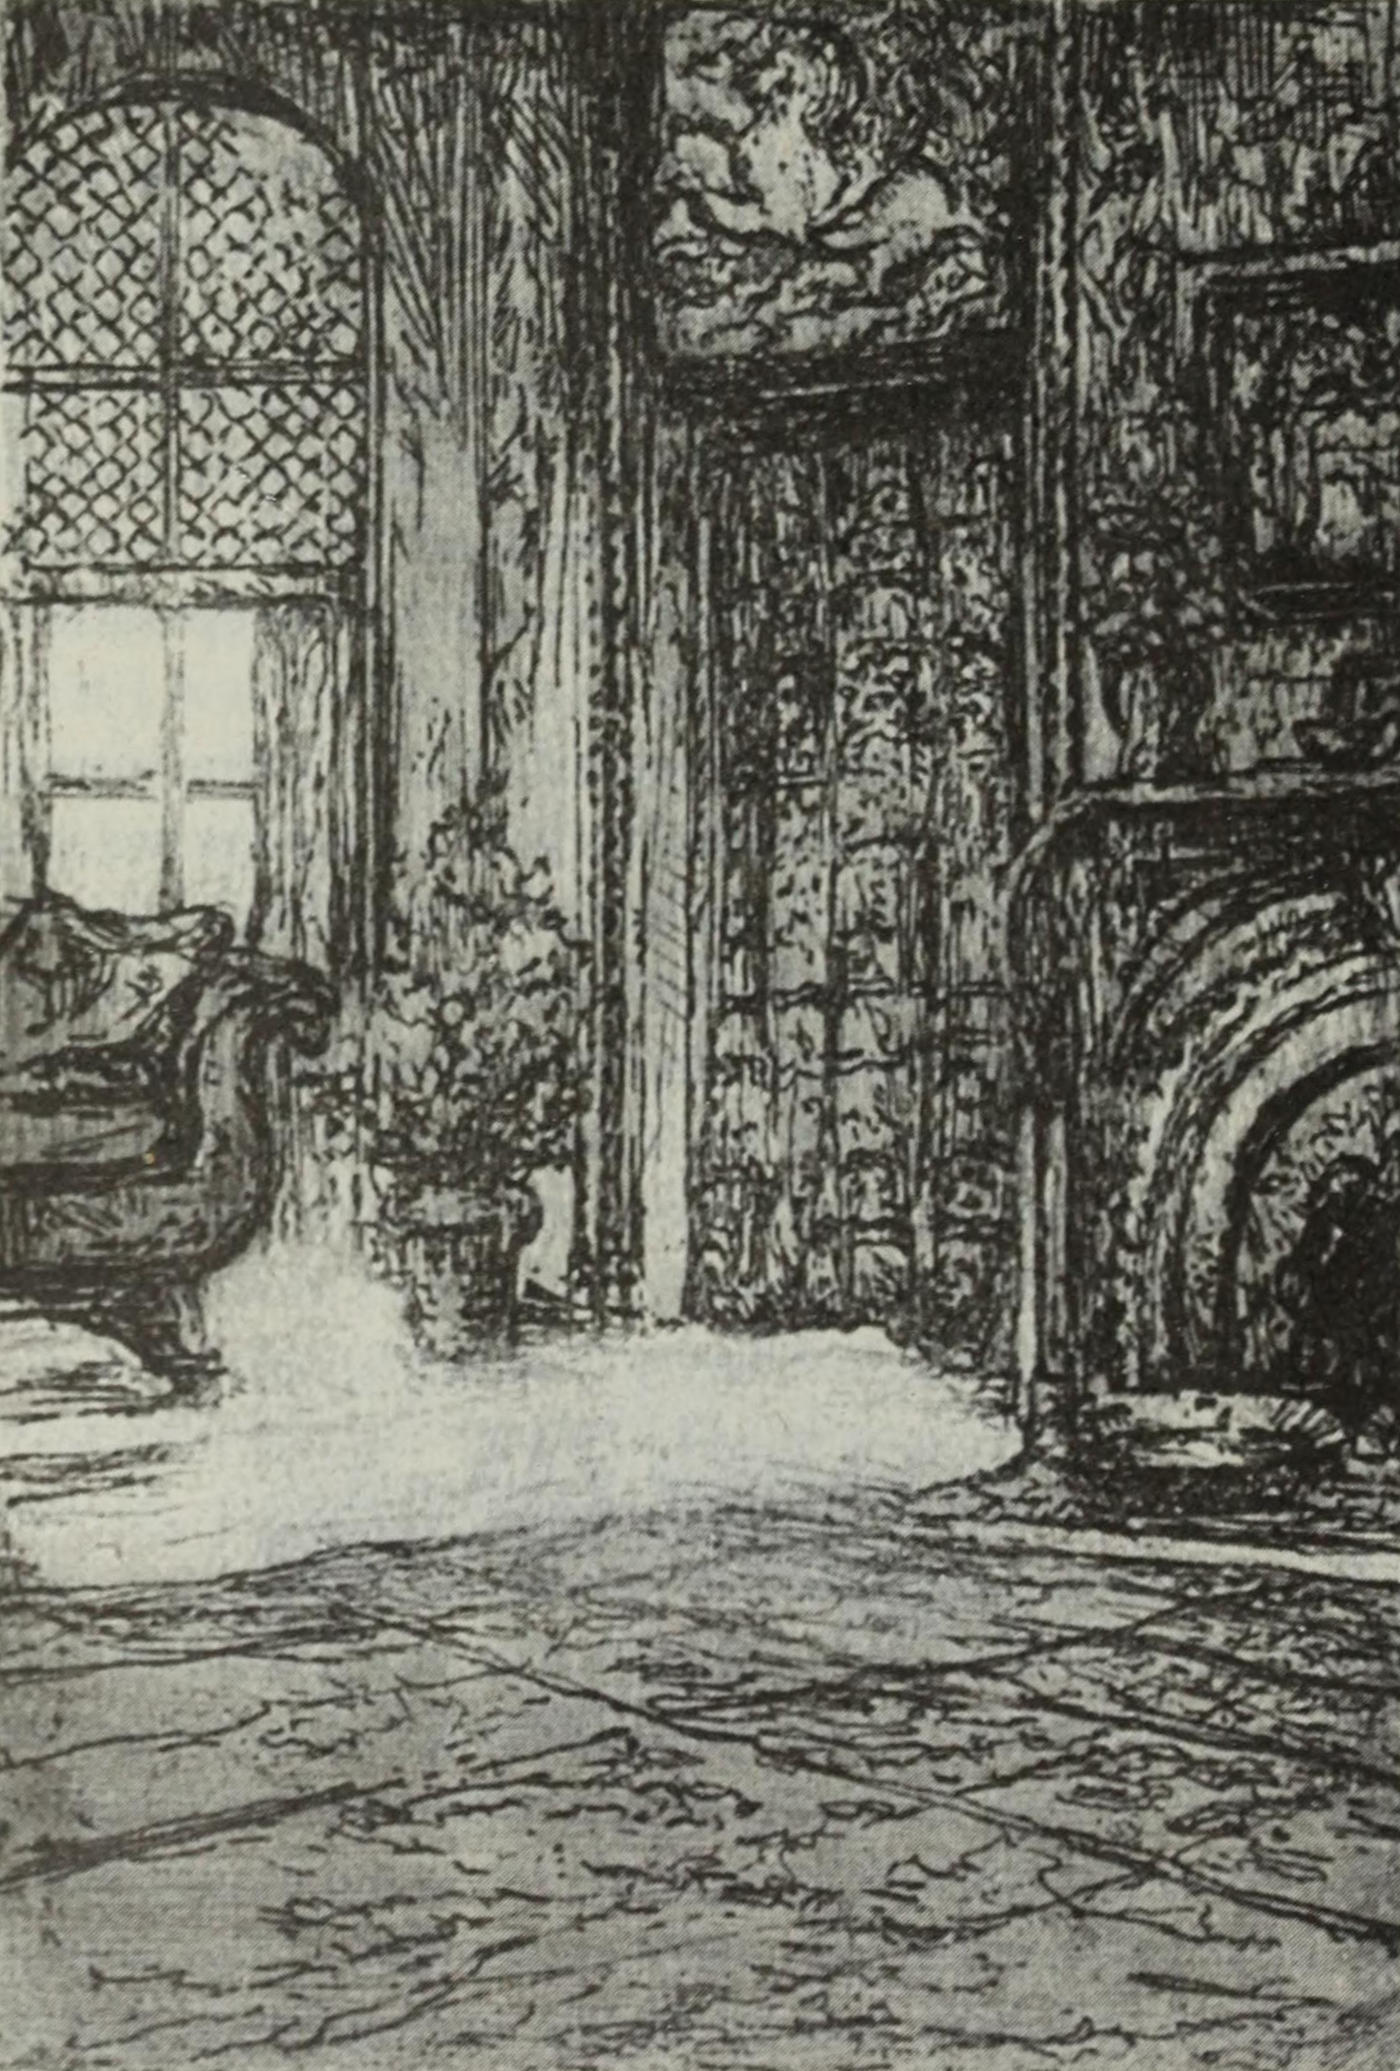 An illustration an ornate room with a fireplace and couch.